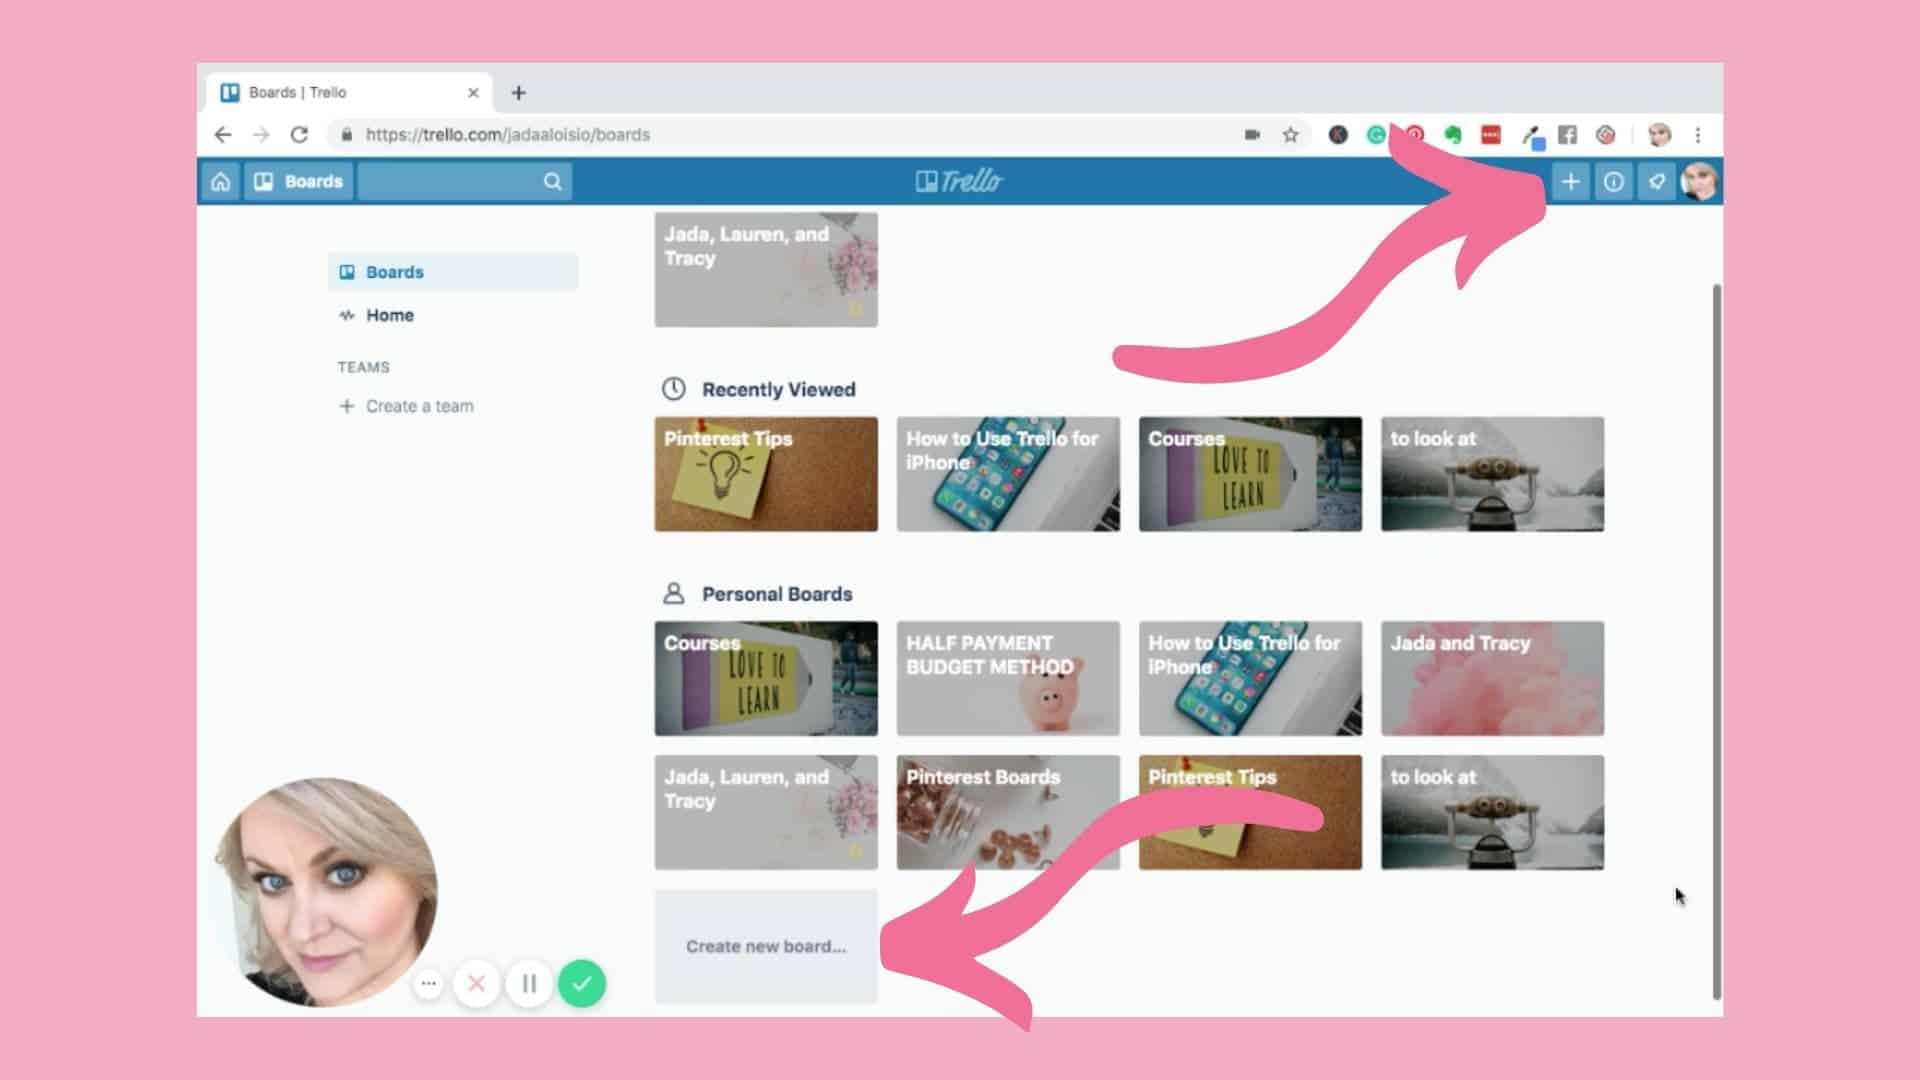 Screenshot of Trello board with arrows pointing to the 2 areas where you can click to create a new Trello board.